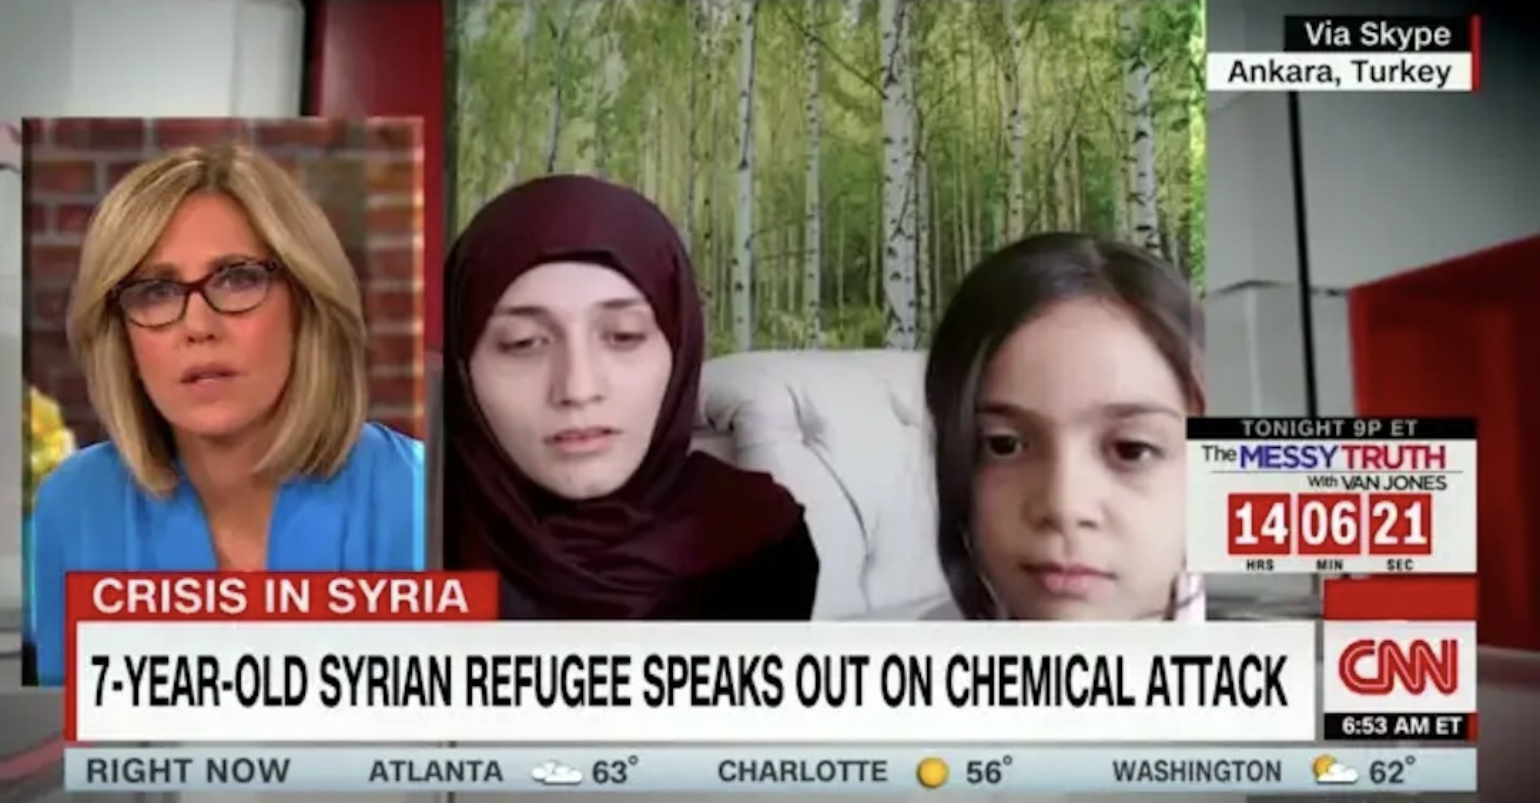 Recalling CNN’s Fraudulent “Interview” With A Seven Year-Old Syrian Girl